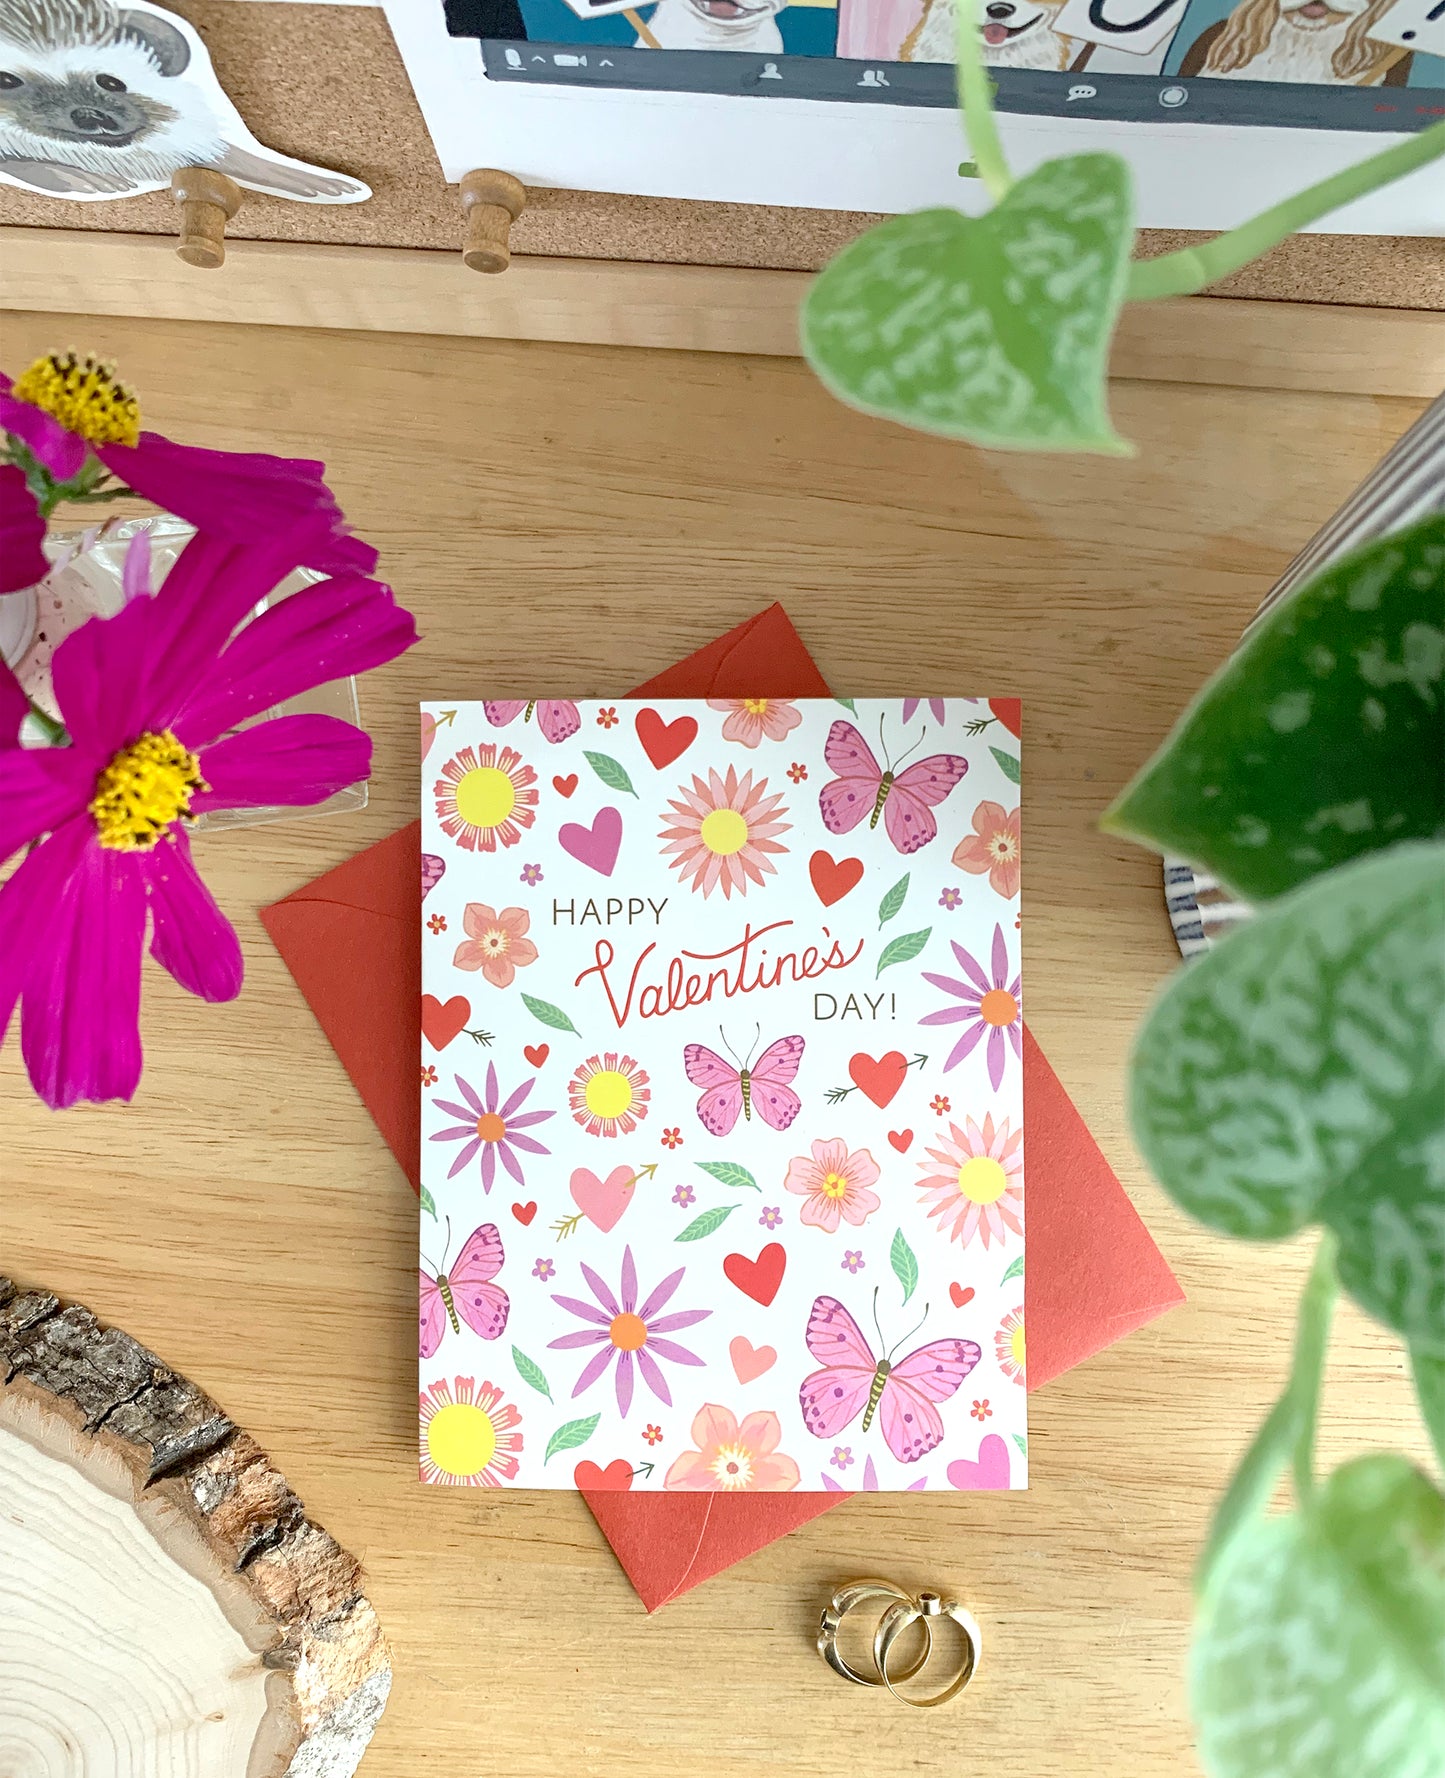 HEARTS, BUTTERFLIES AND FLOWERS - VALENTINE'S DAY GREETING CARD